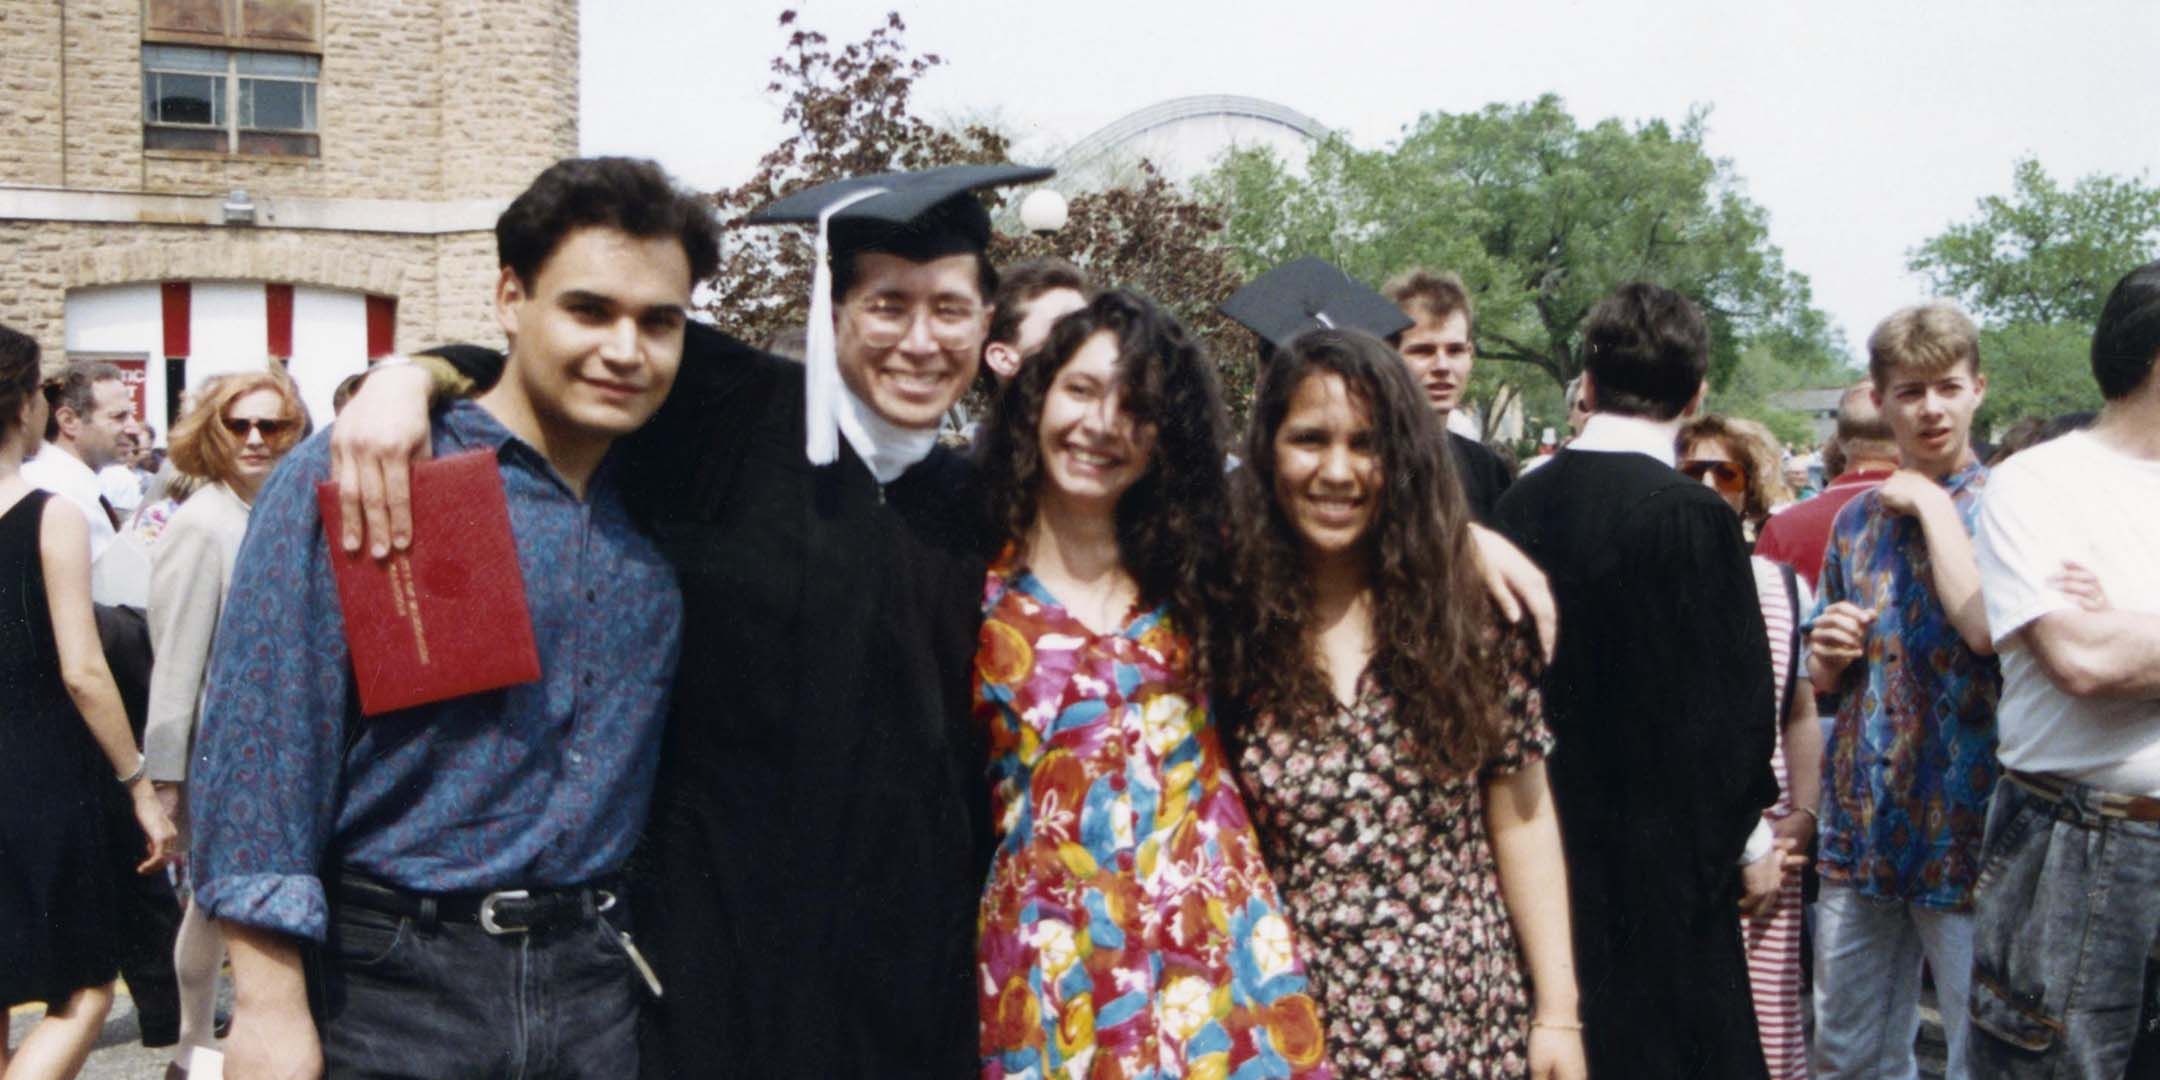 Members of La Colectiva celebrating graduation outside of Camp Randall in 1992.